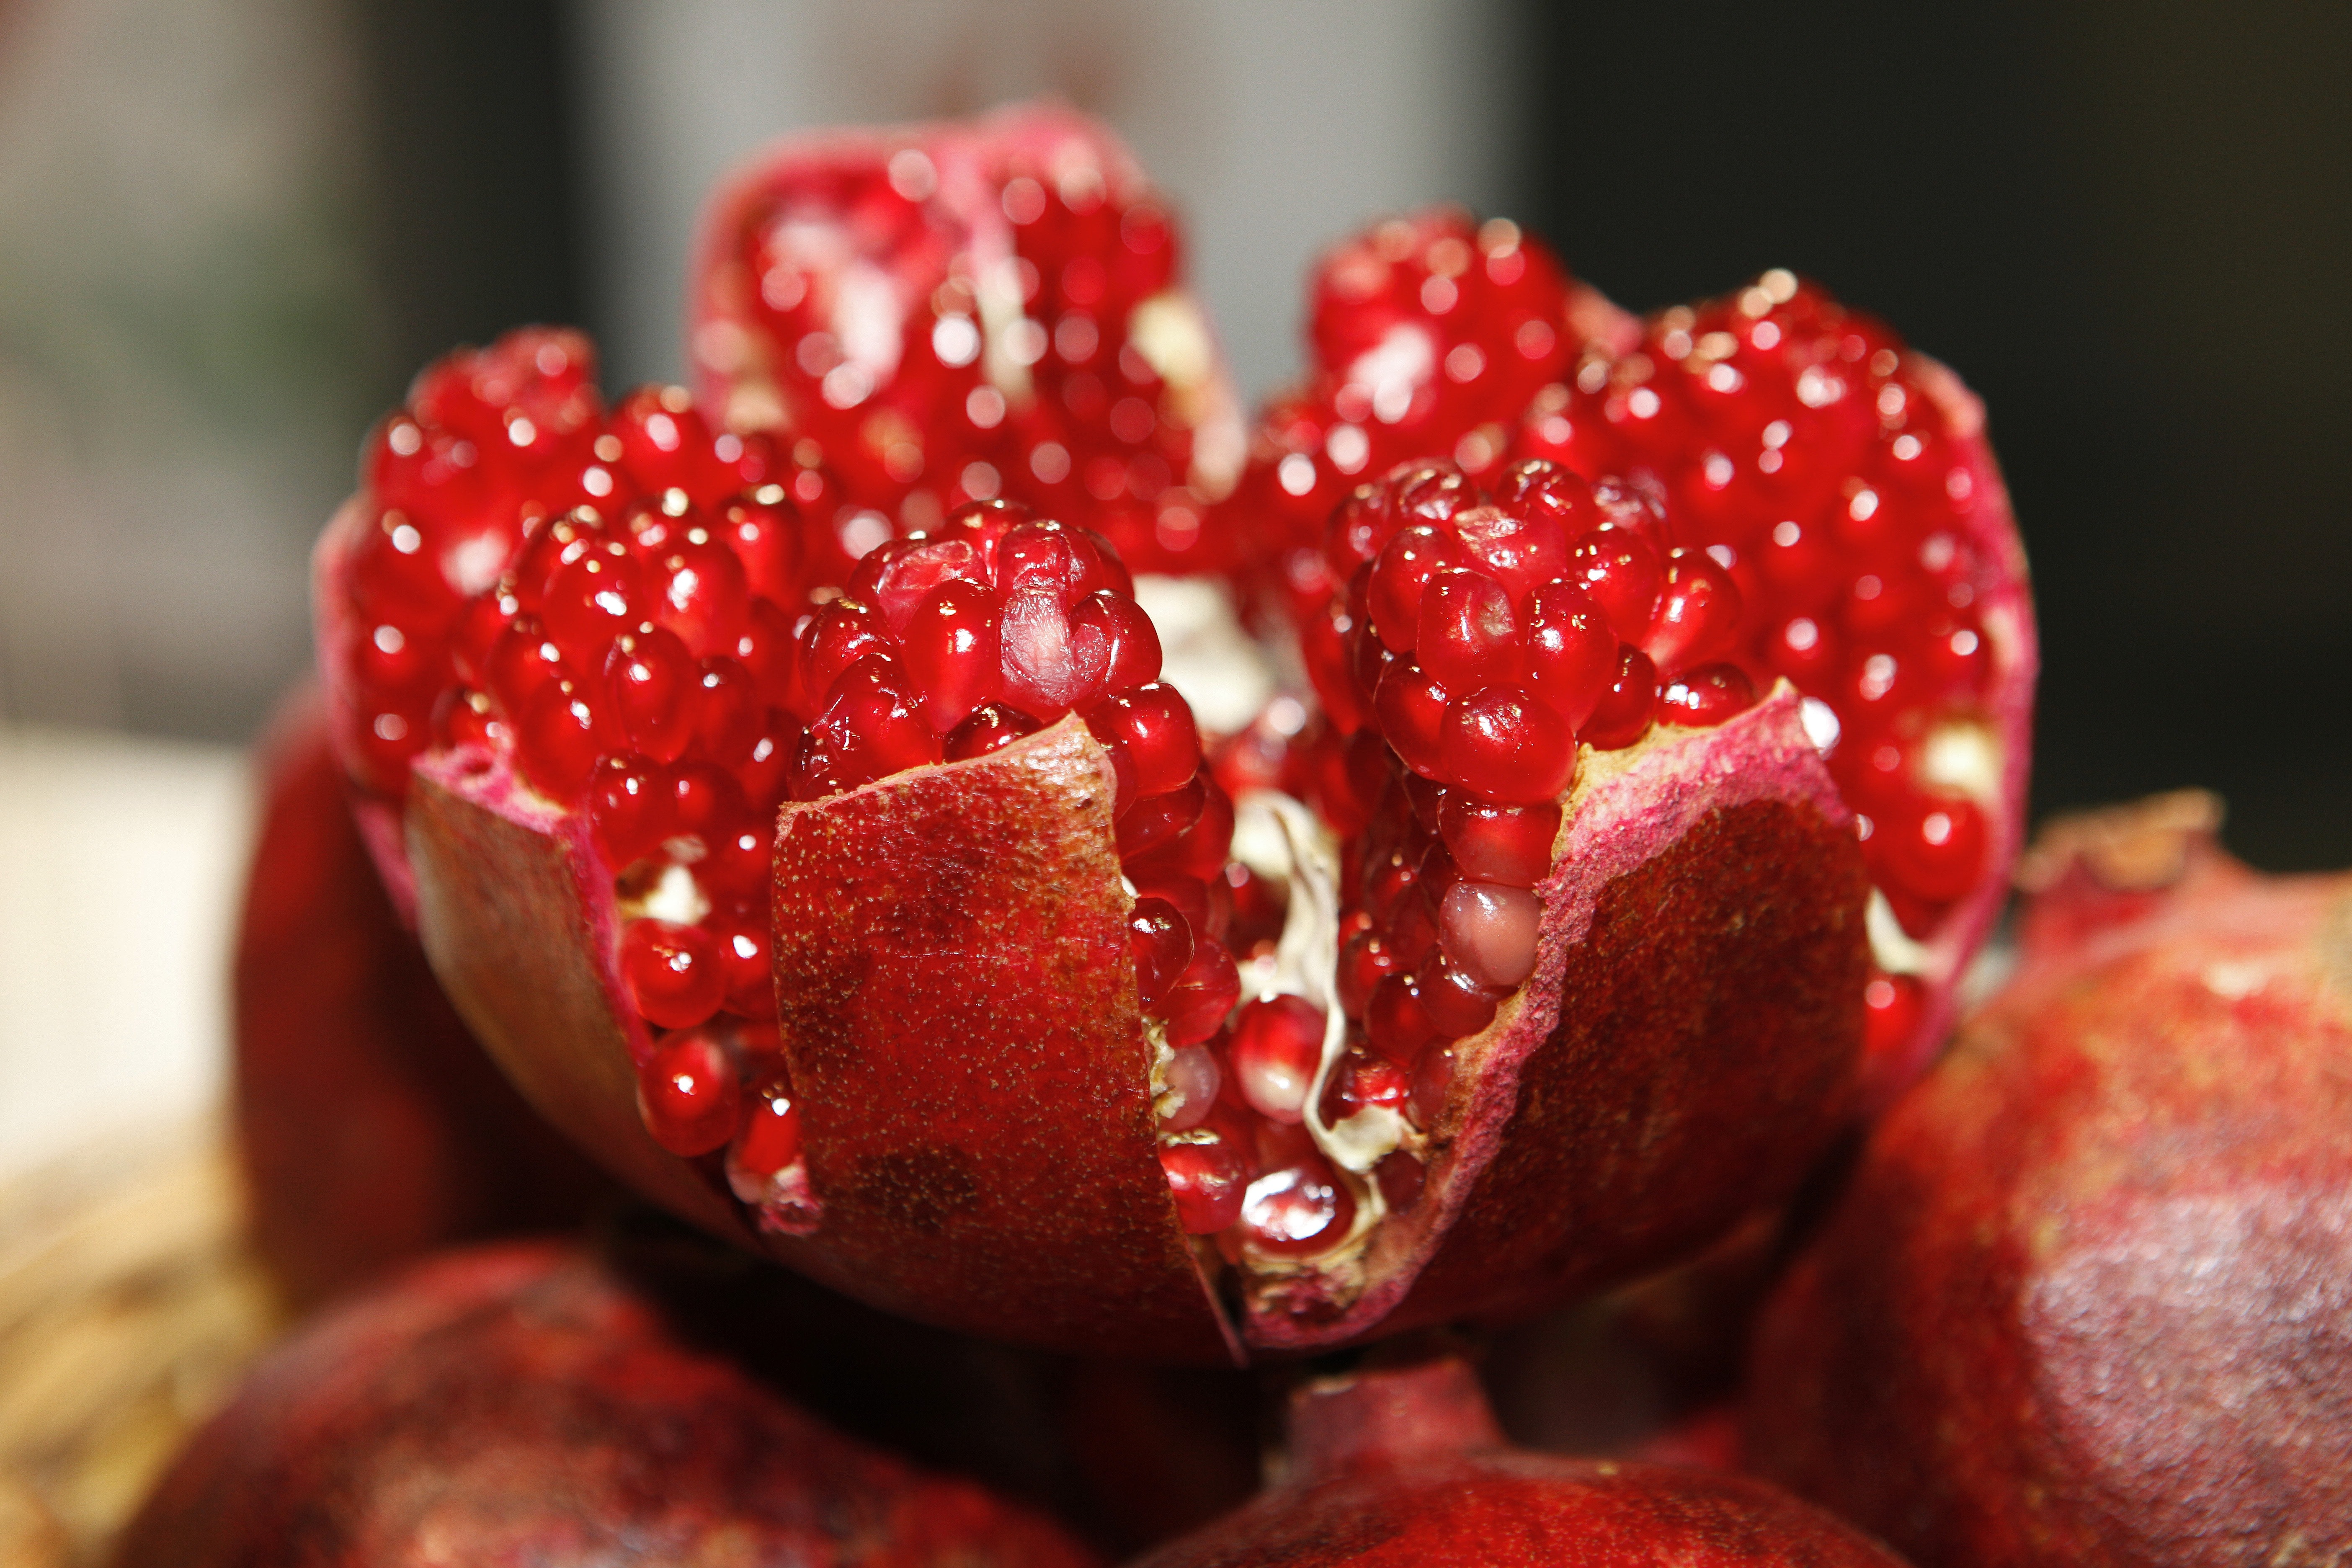 Photograph of a opened pomegranate